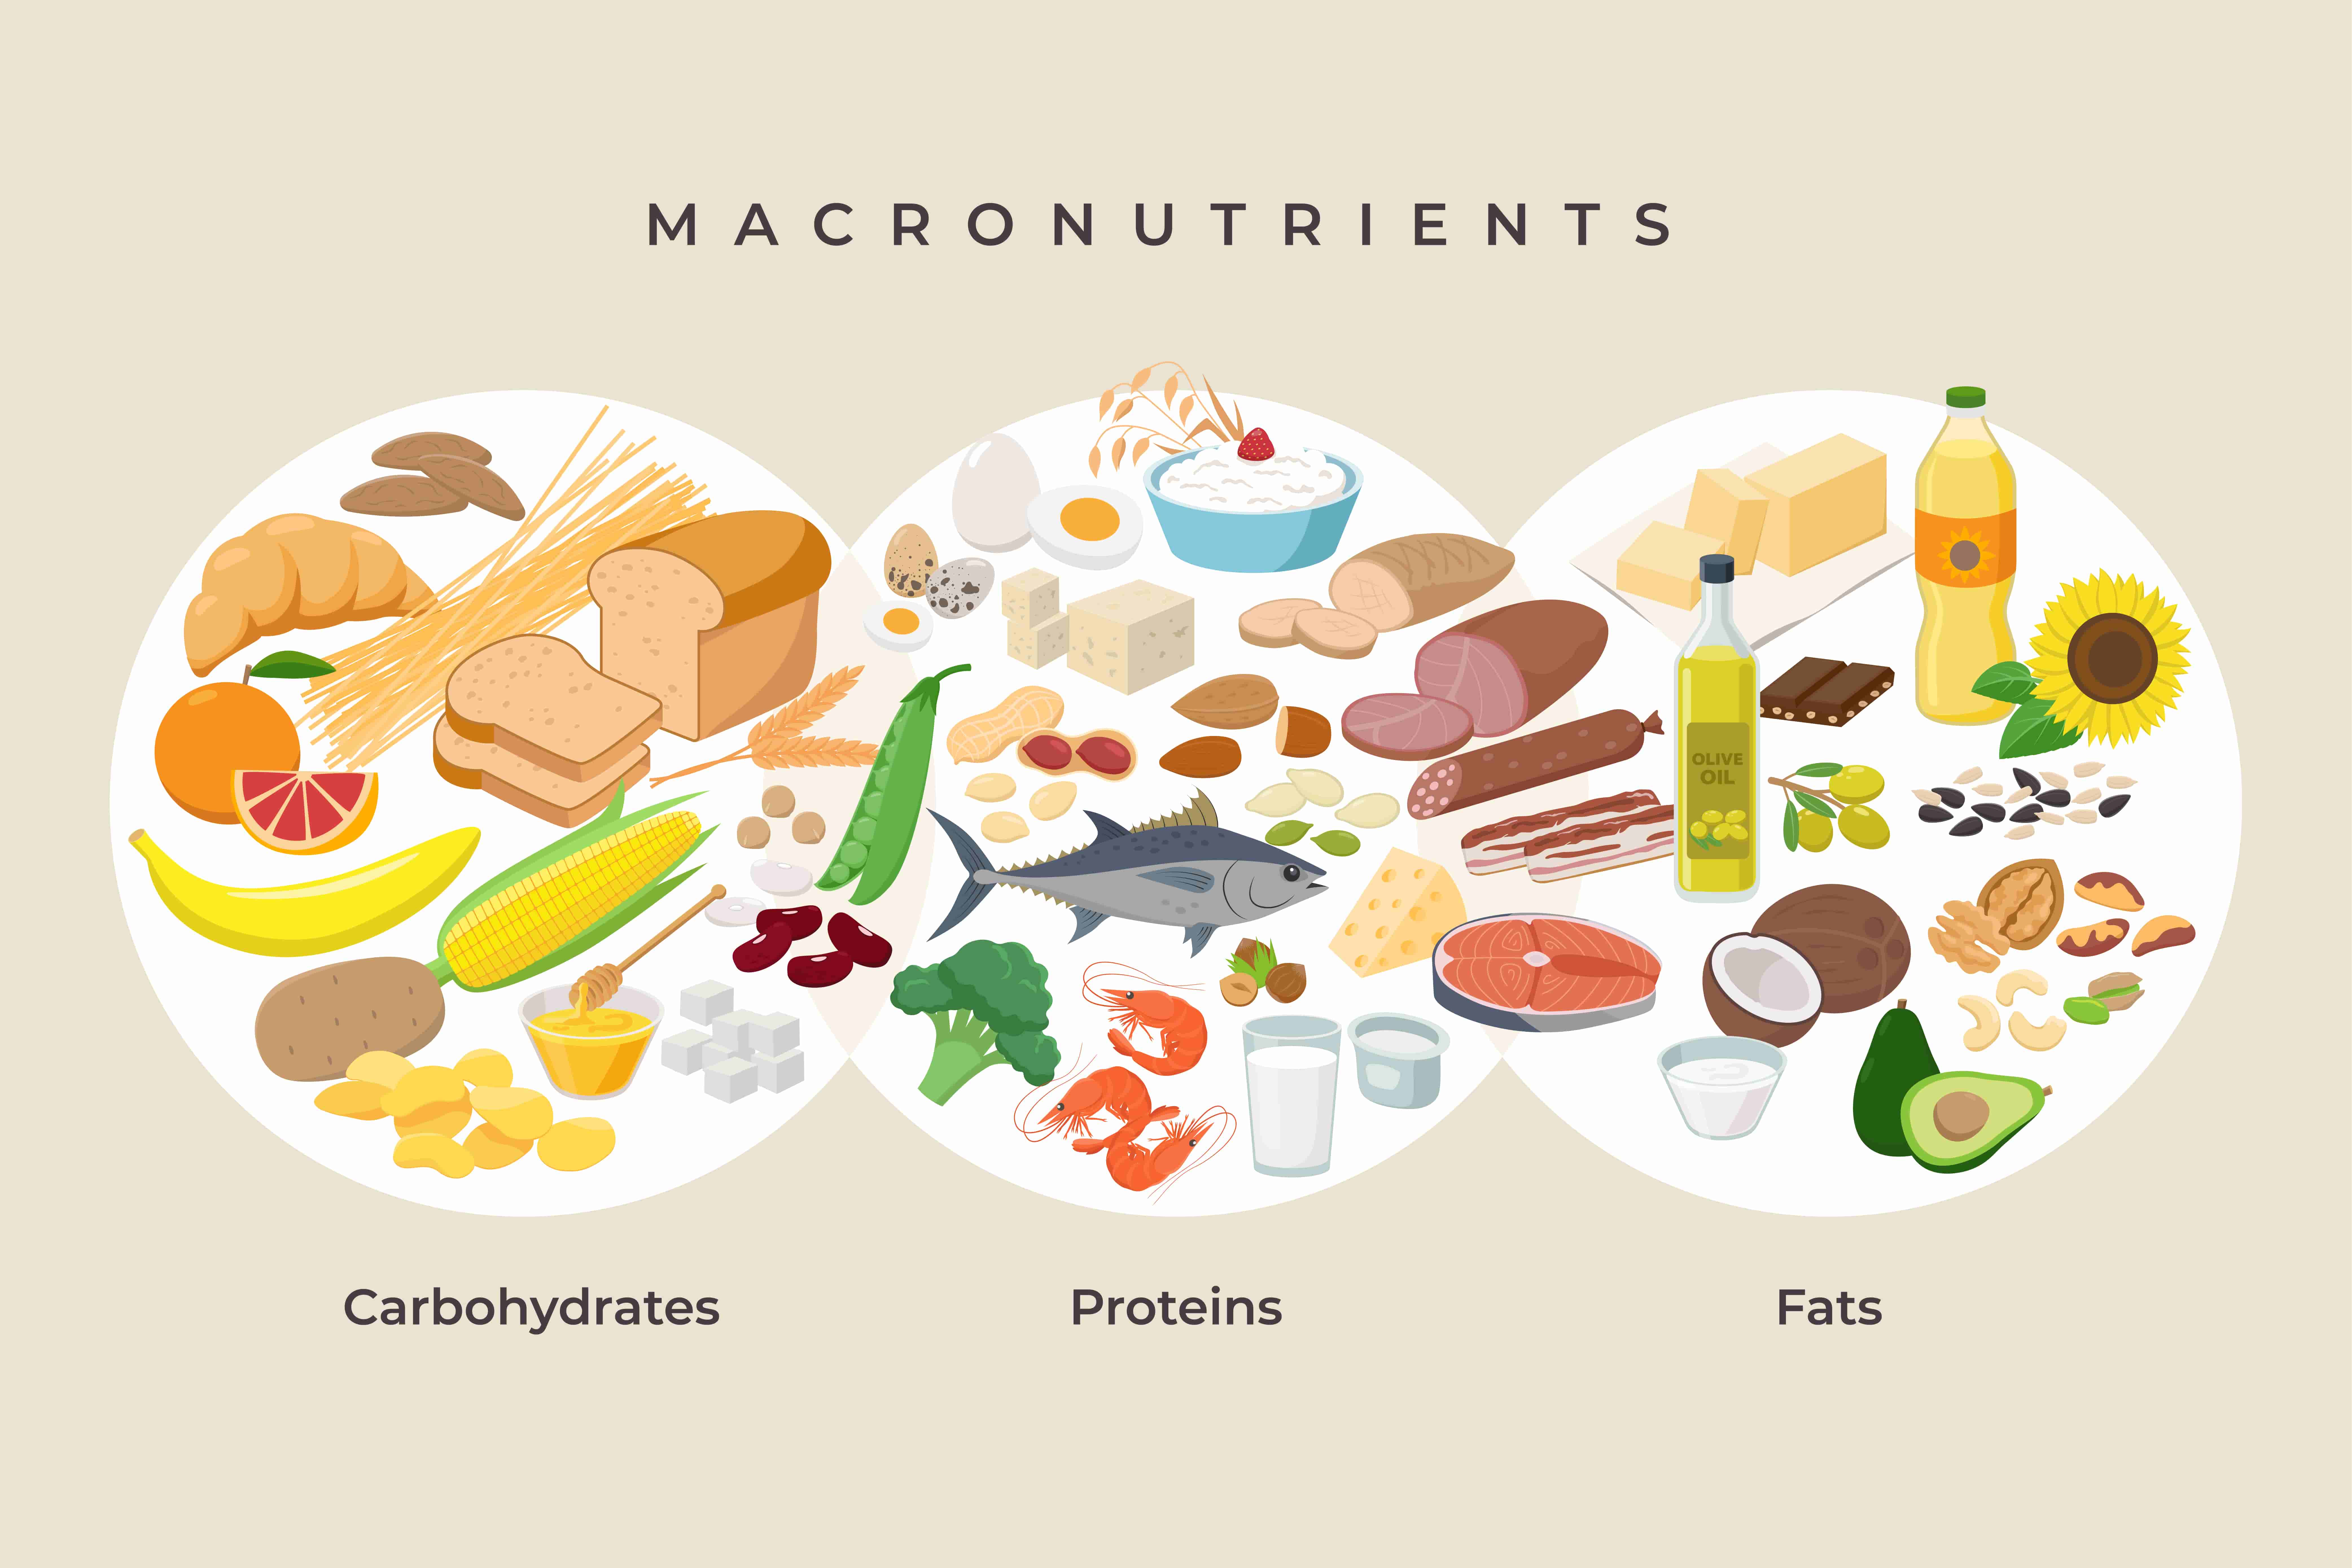 Macronutrients: Carbohydrates, Proteins, Fats